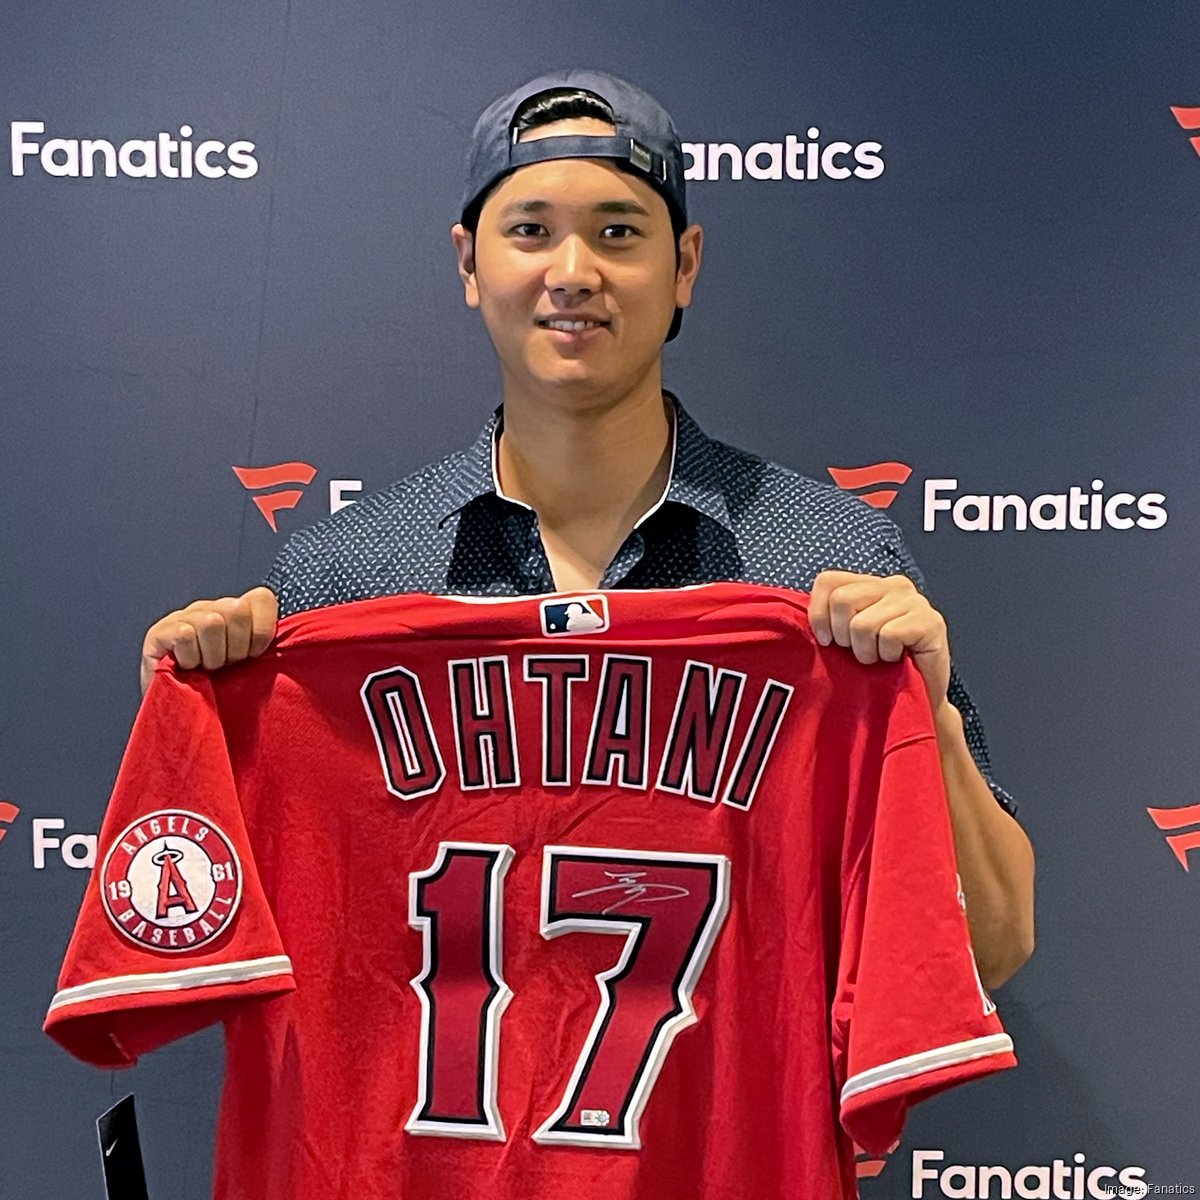 Fanatics signs Shohei Ohtani to licensing deal - Jacksonville